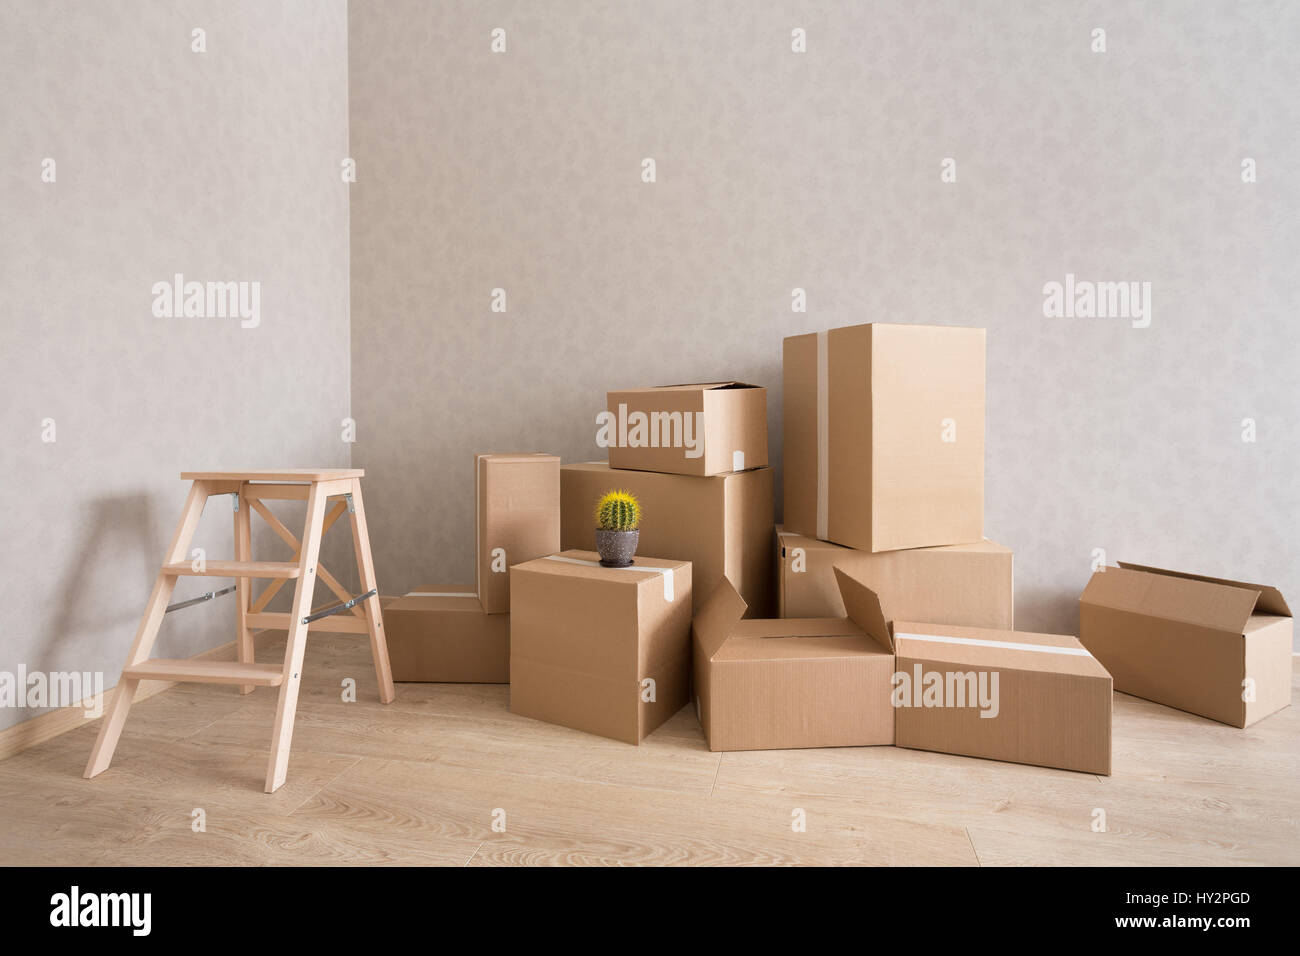 Cardboard boxes pile in new empty room with step-ladder Stock Photo